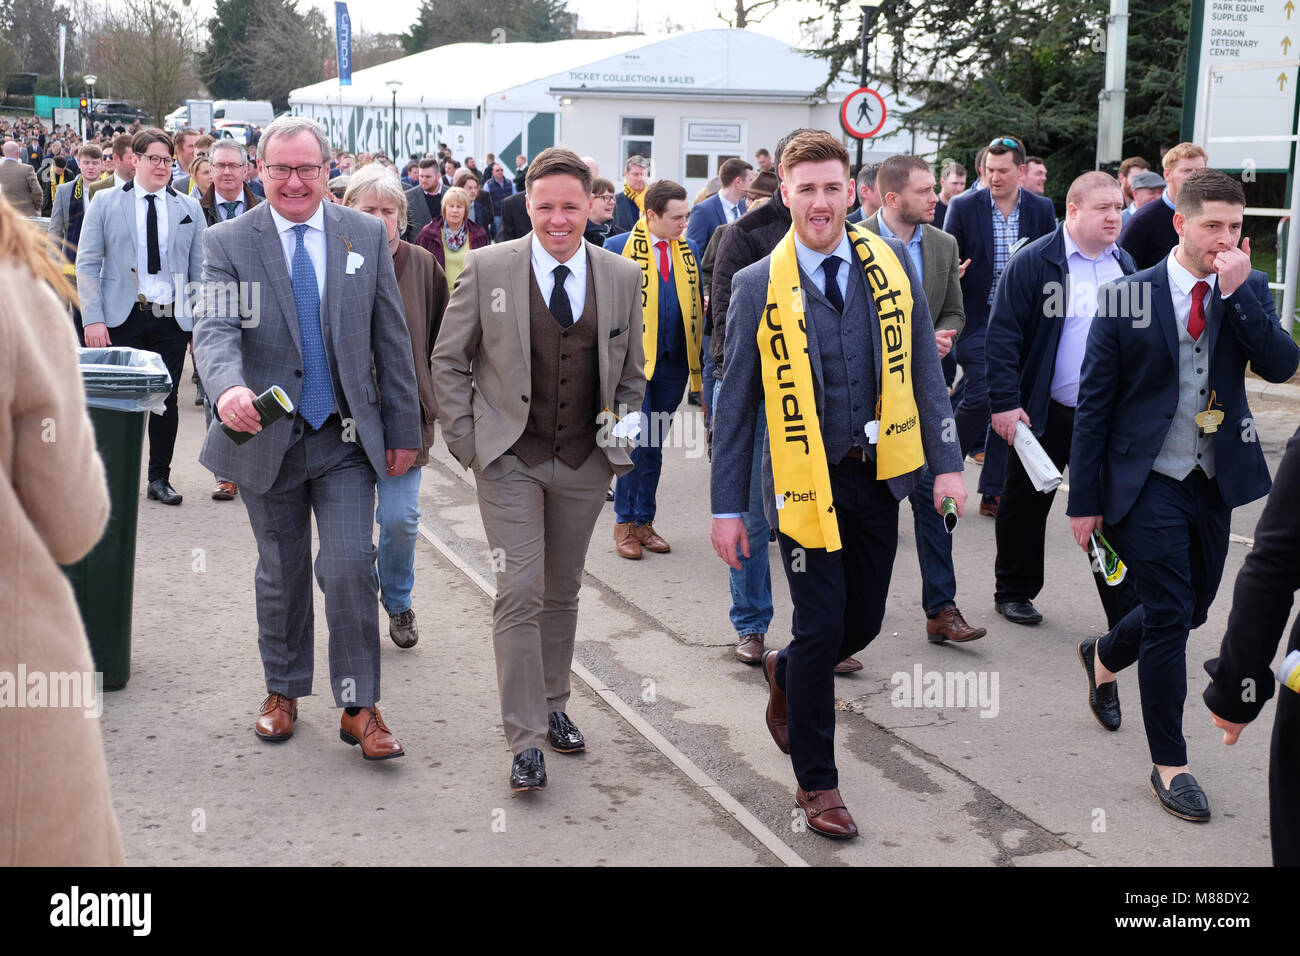 Cheltenham Festival, Gloucestershire, UK - Friday 16th March 2018 - Race goers arrive at the Cheltenham racing festival ahead of this afternoons classic Gold Cup race.  Steven May / Alamy Live News Stock Photo